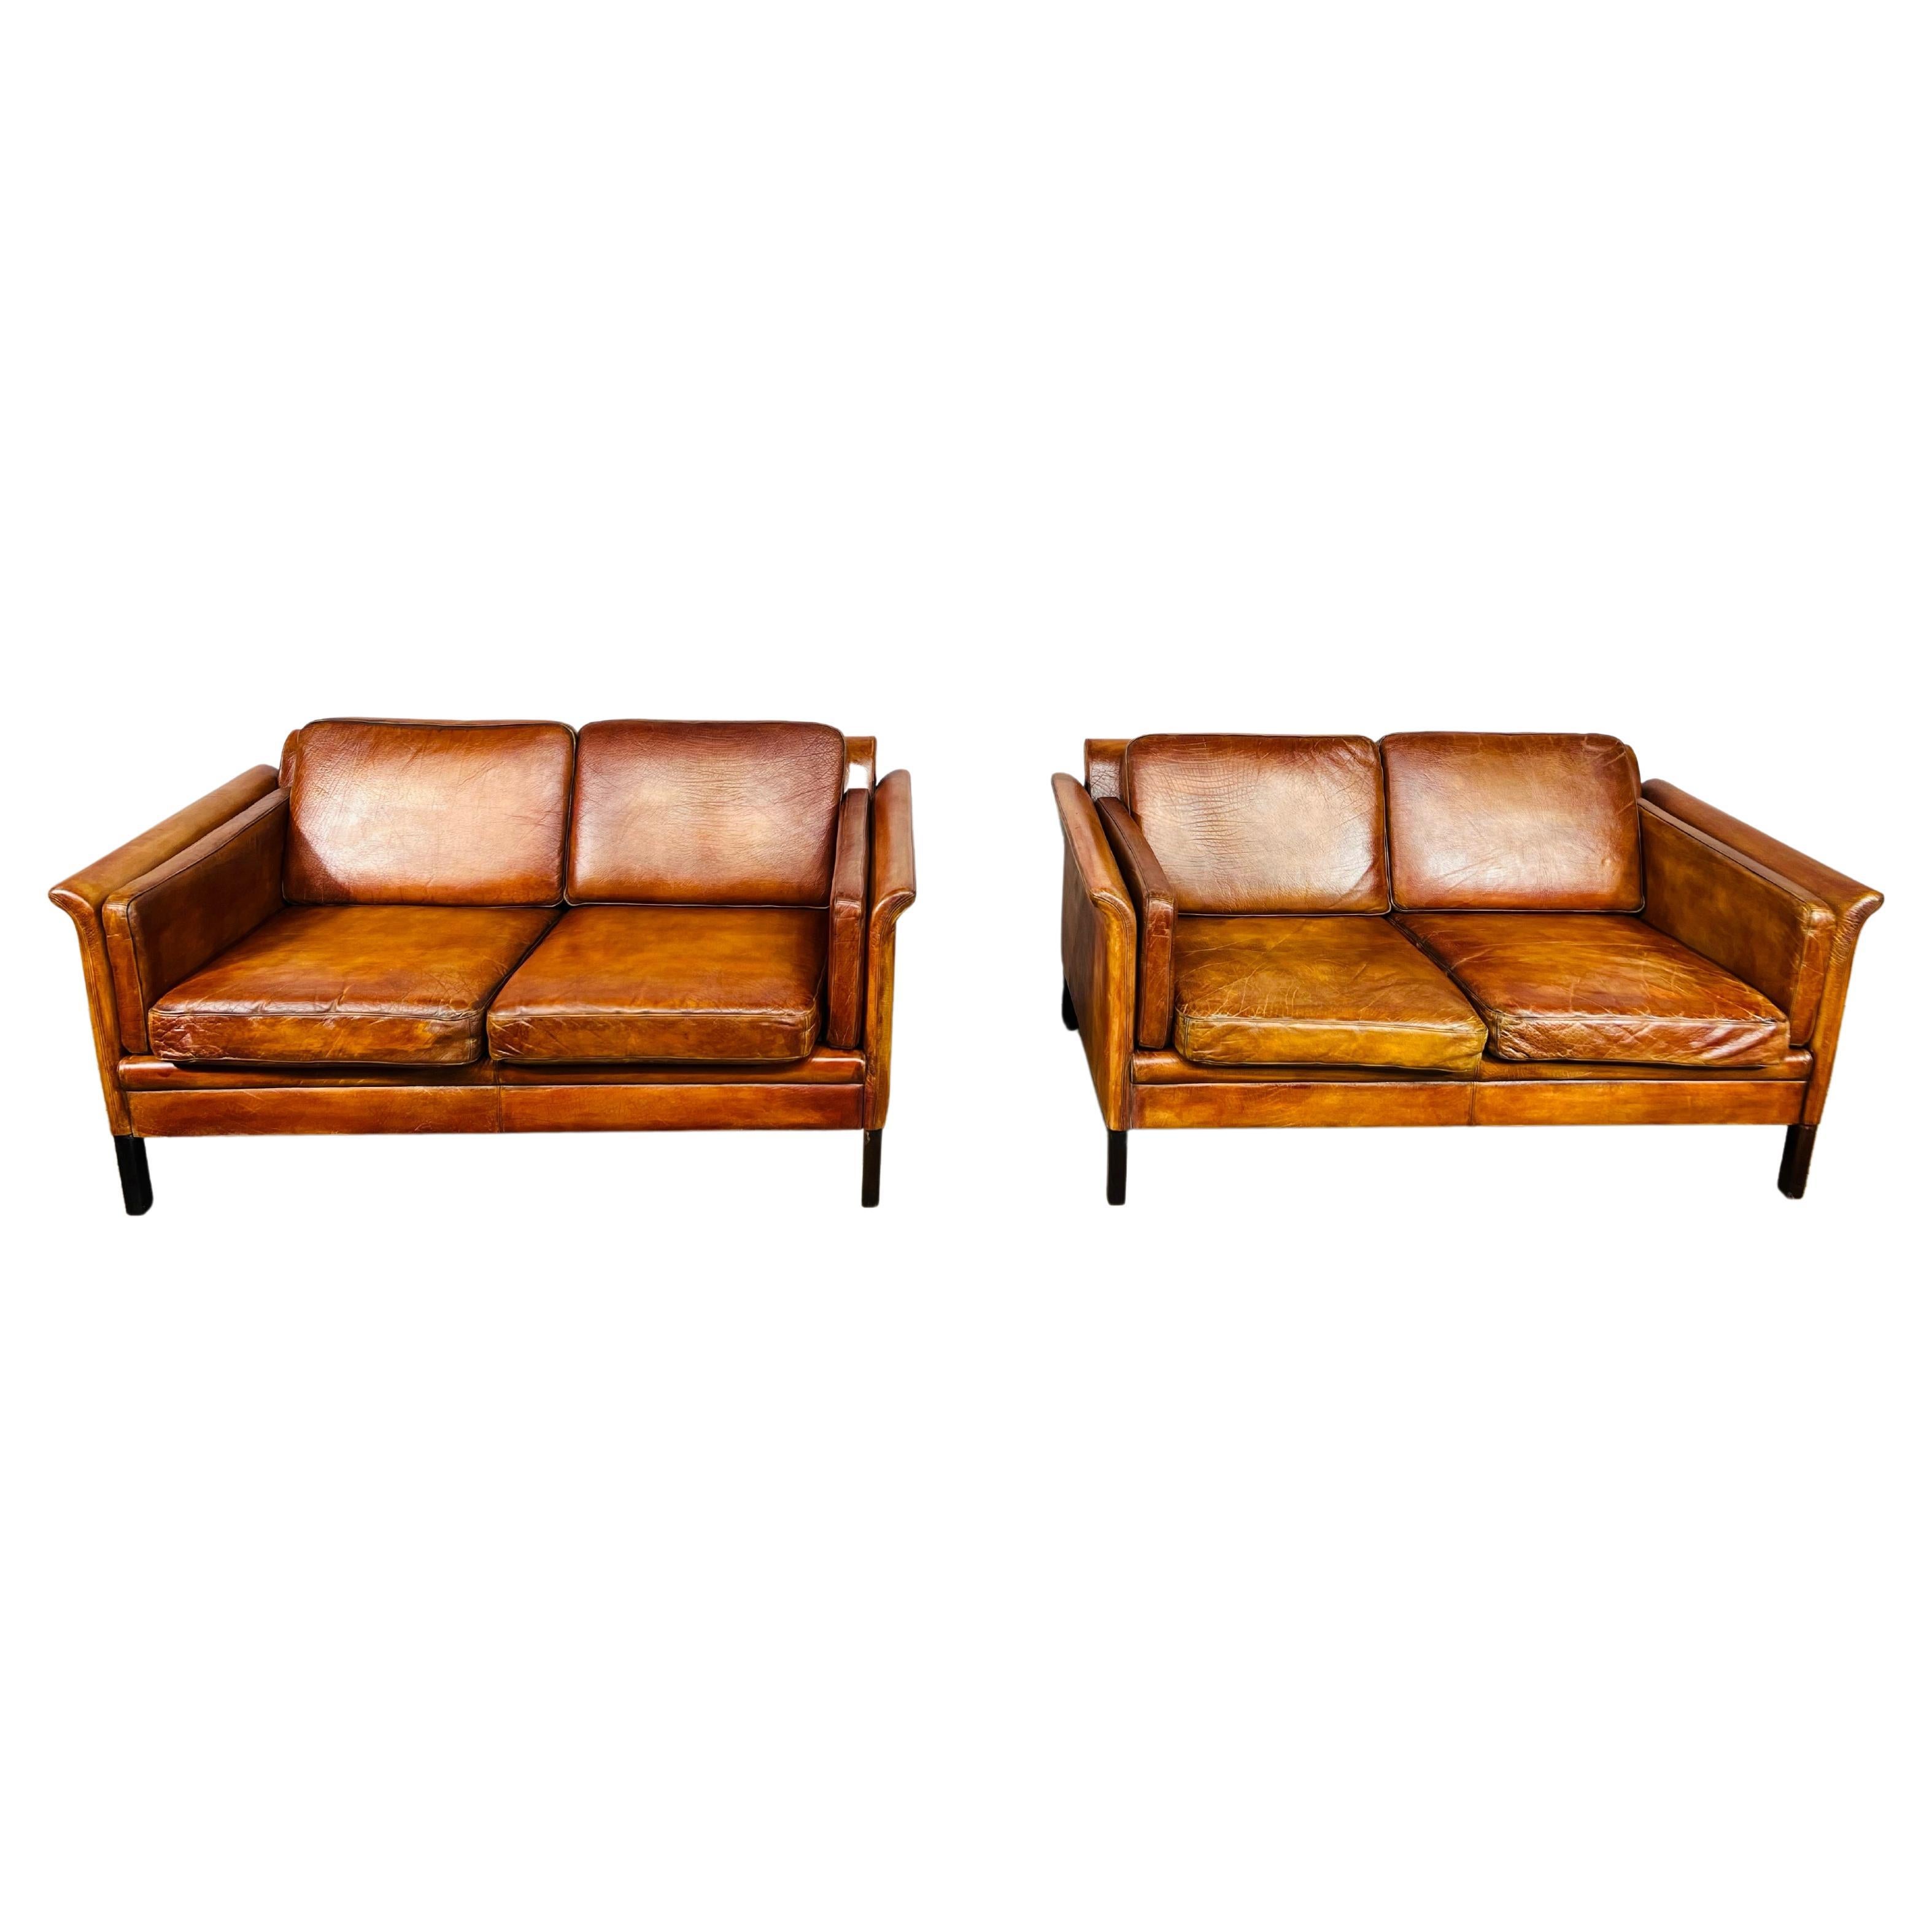 Pair of Vintage 1970s Patinated Light Tan 2 Seater Leather Sofas #676 For Sale